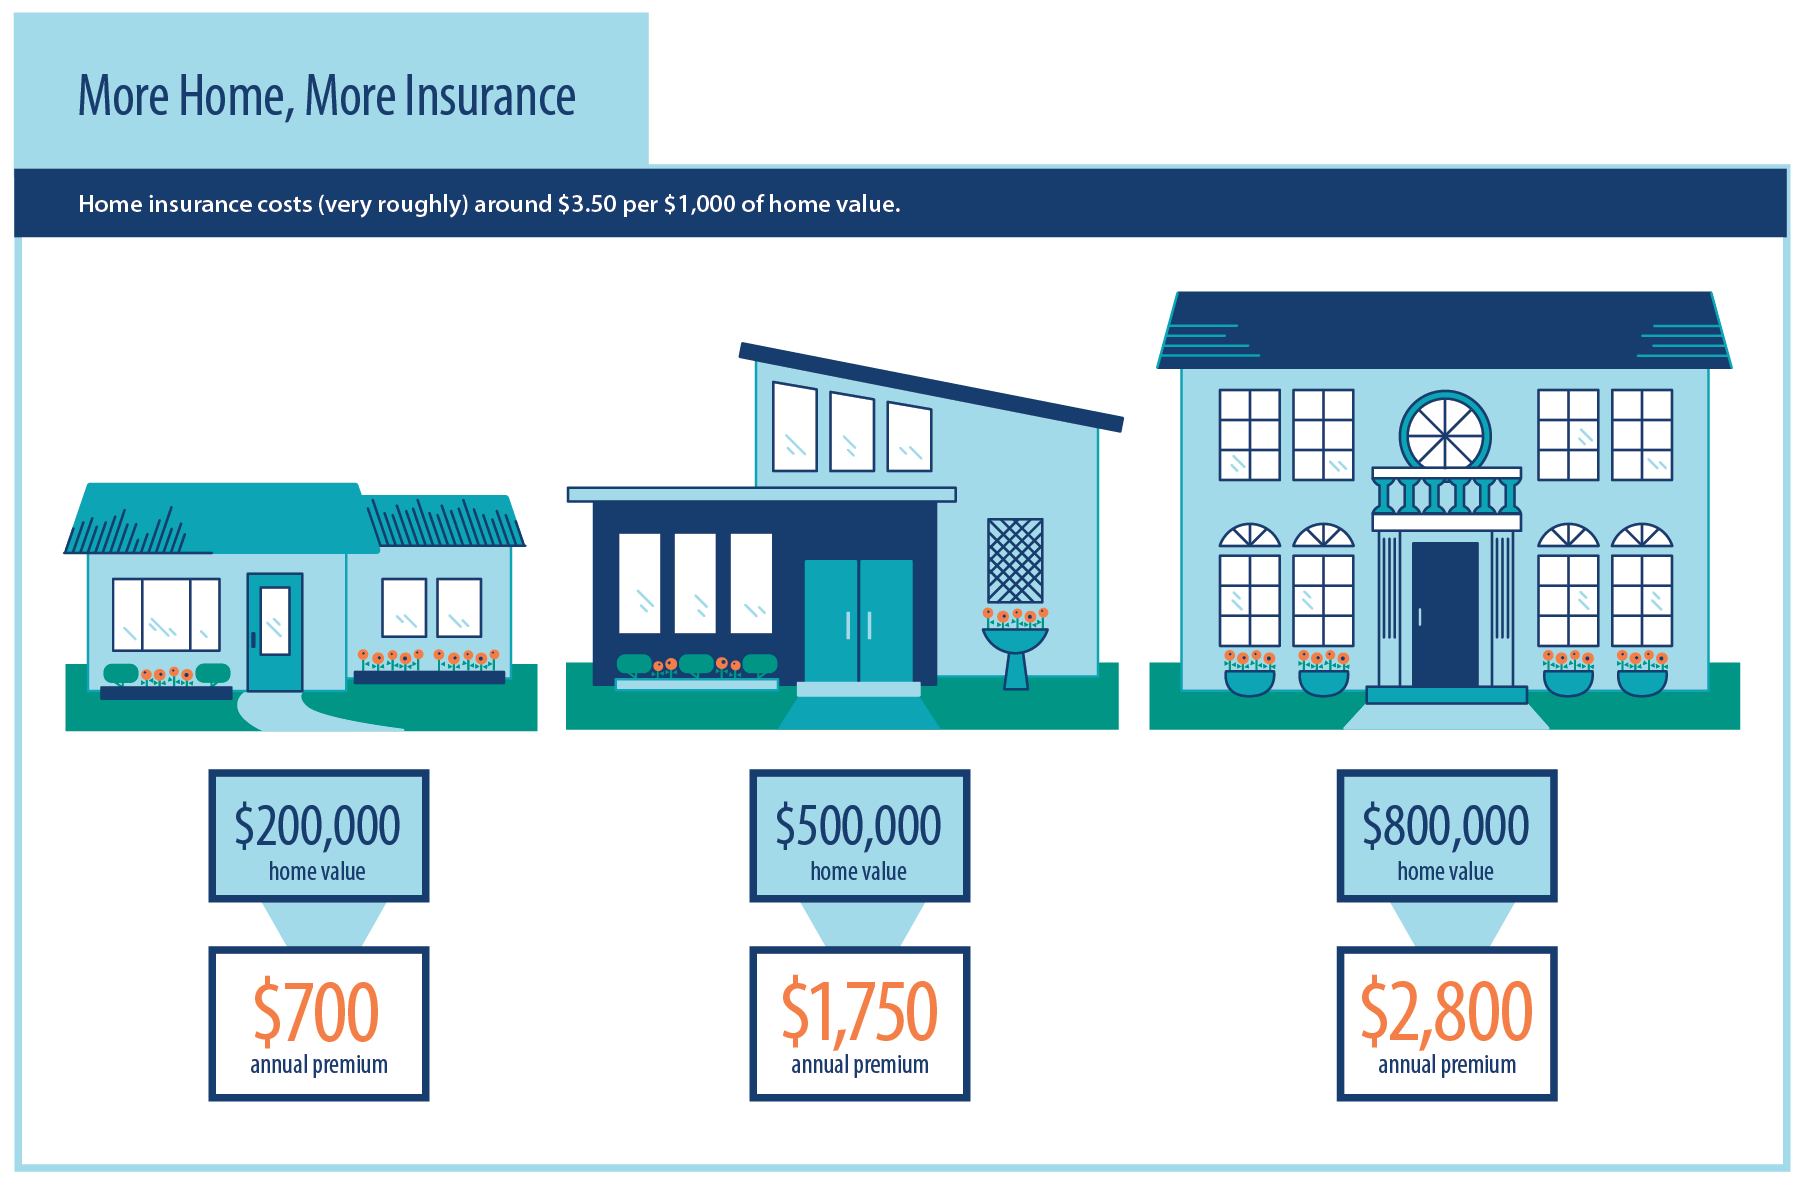 The average cost of home insurance